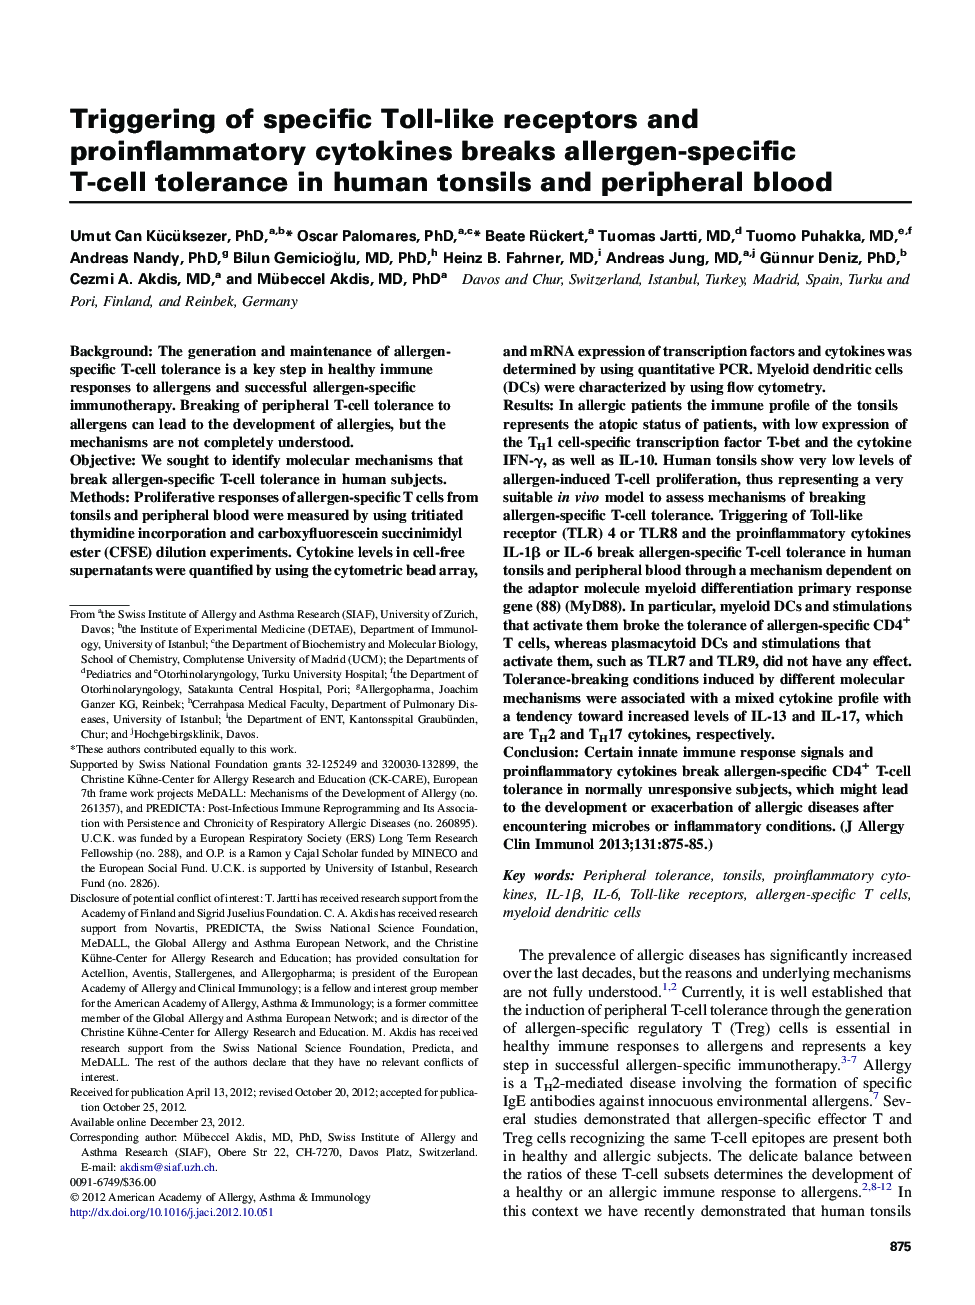 Triggering of specific Toll-like receptors and proinflammatory cytokines breaks allergen-specific T-cell tolerance in human tonsils and peripheral blood